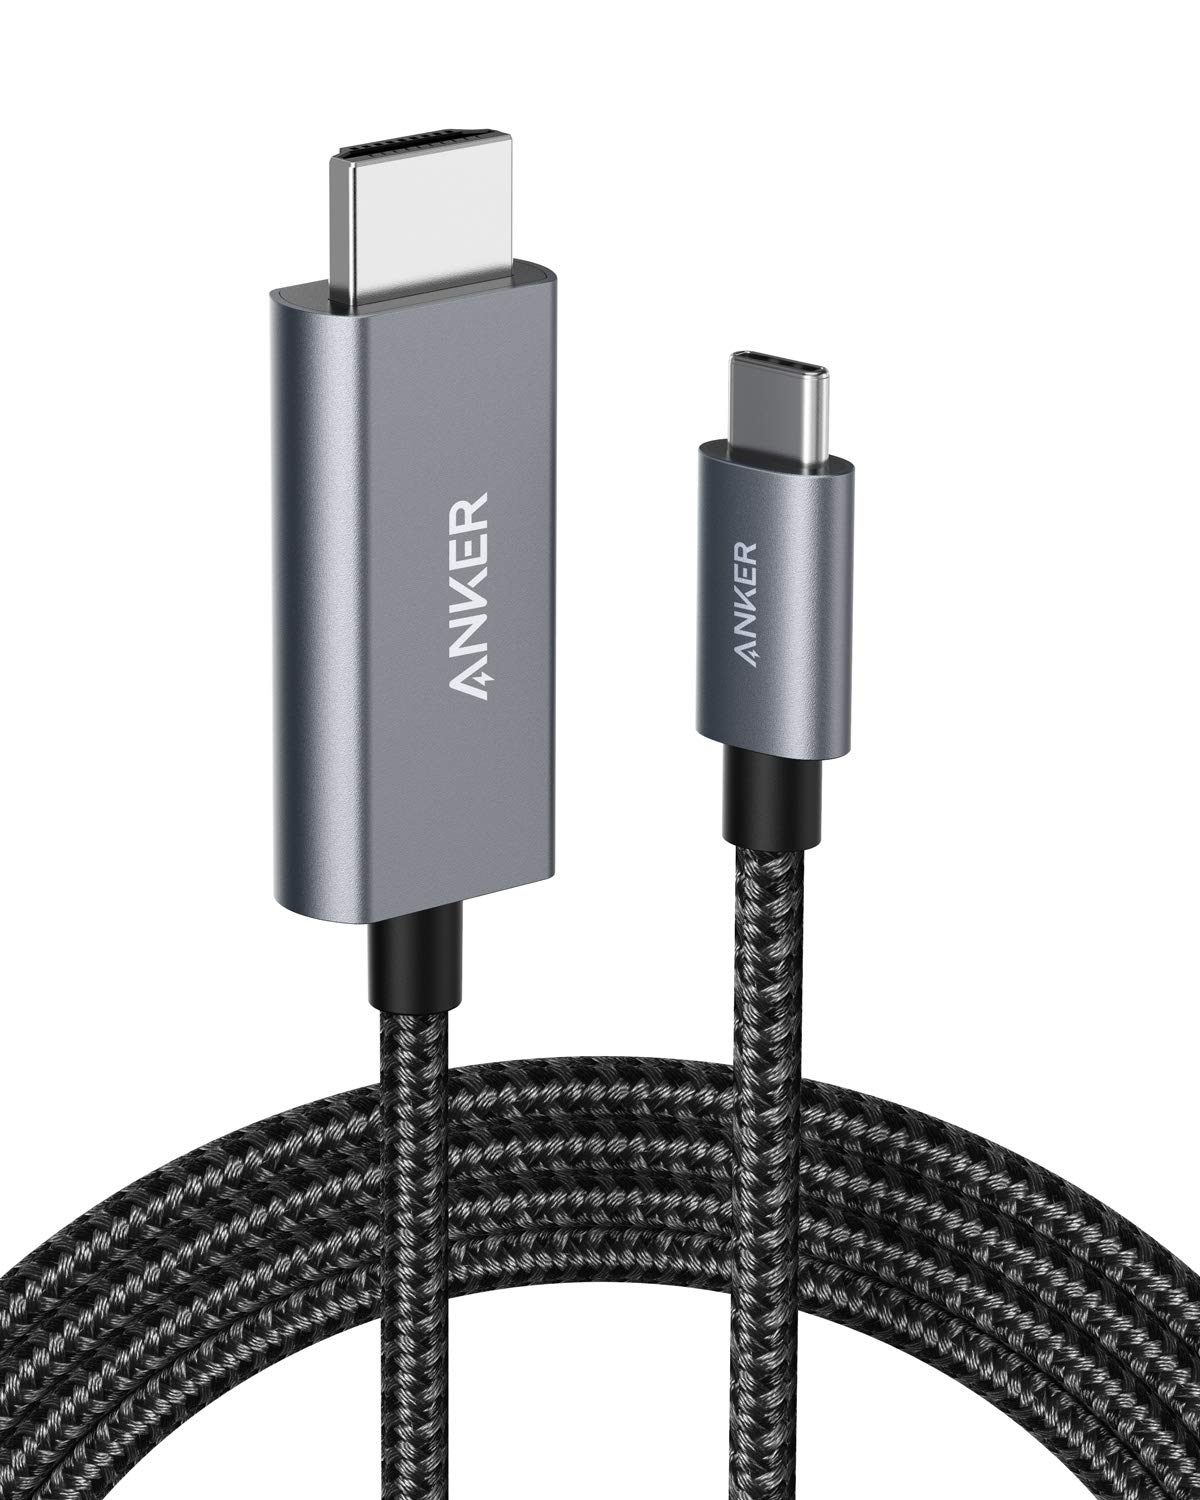 Connect TV Using USB C HDMI (Solution) - Anker